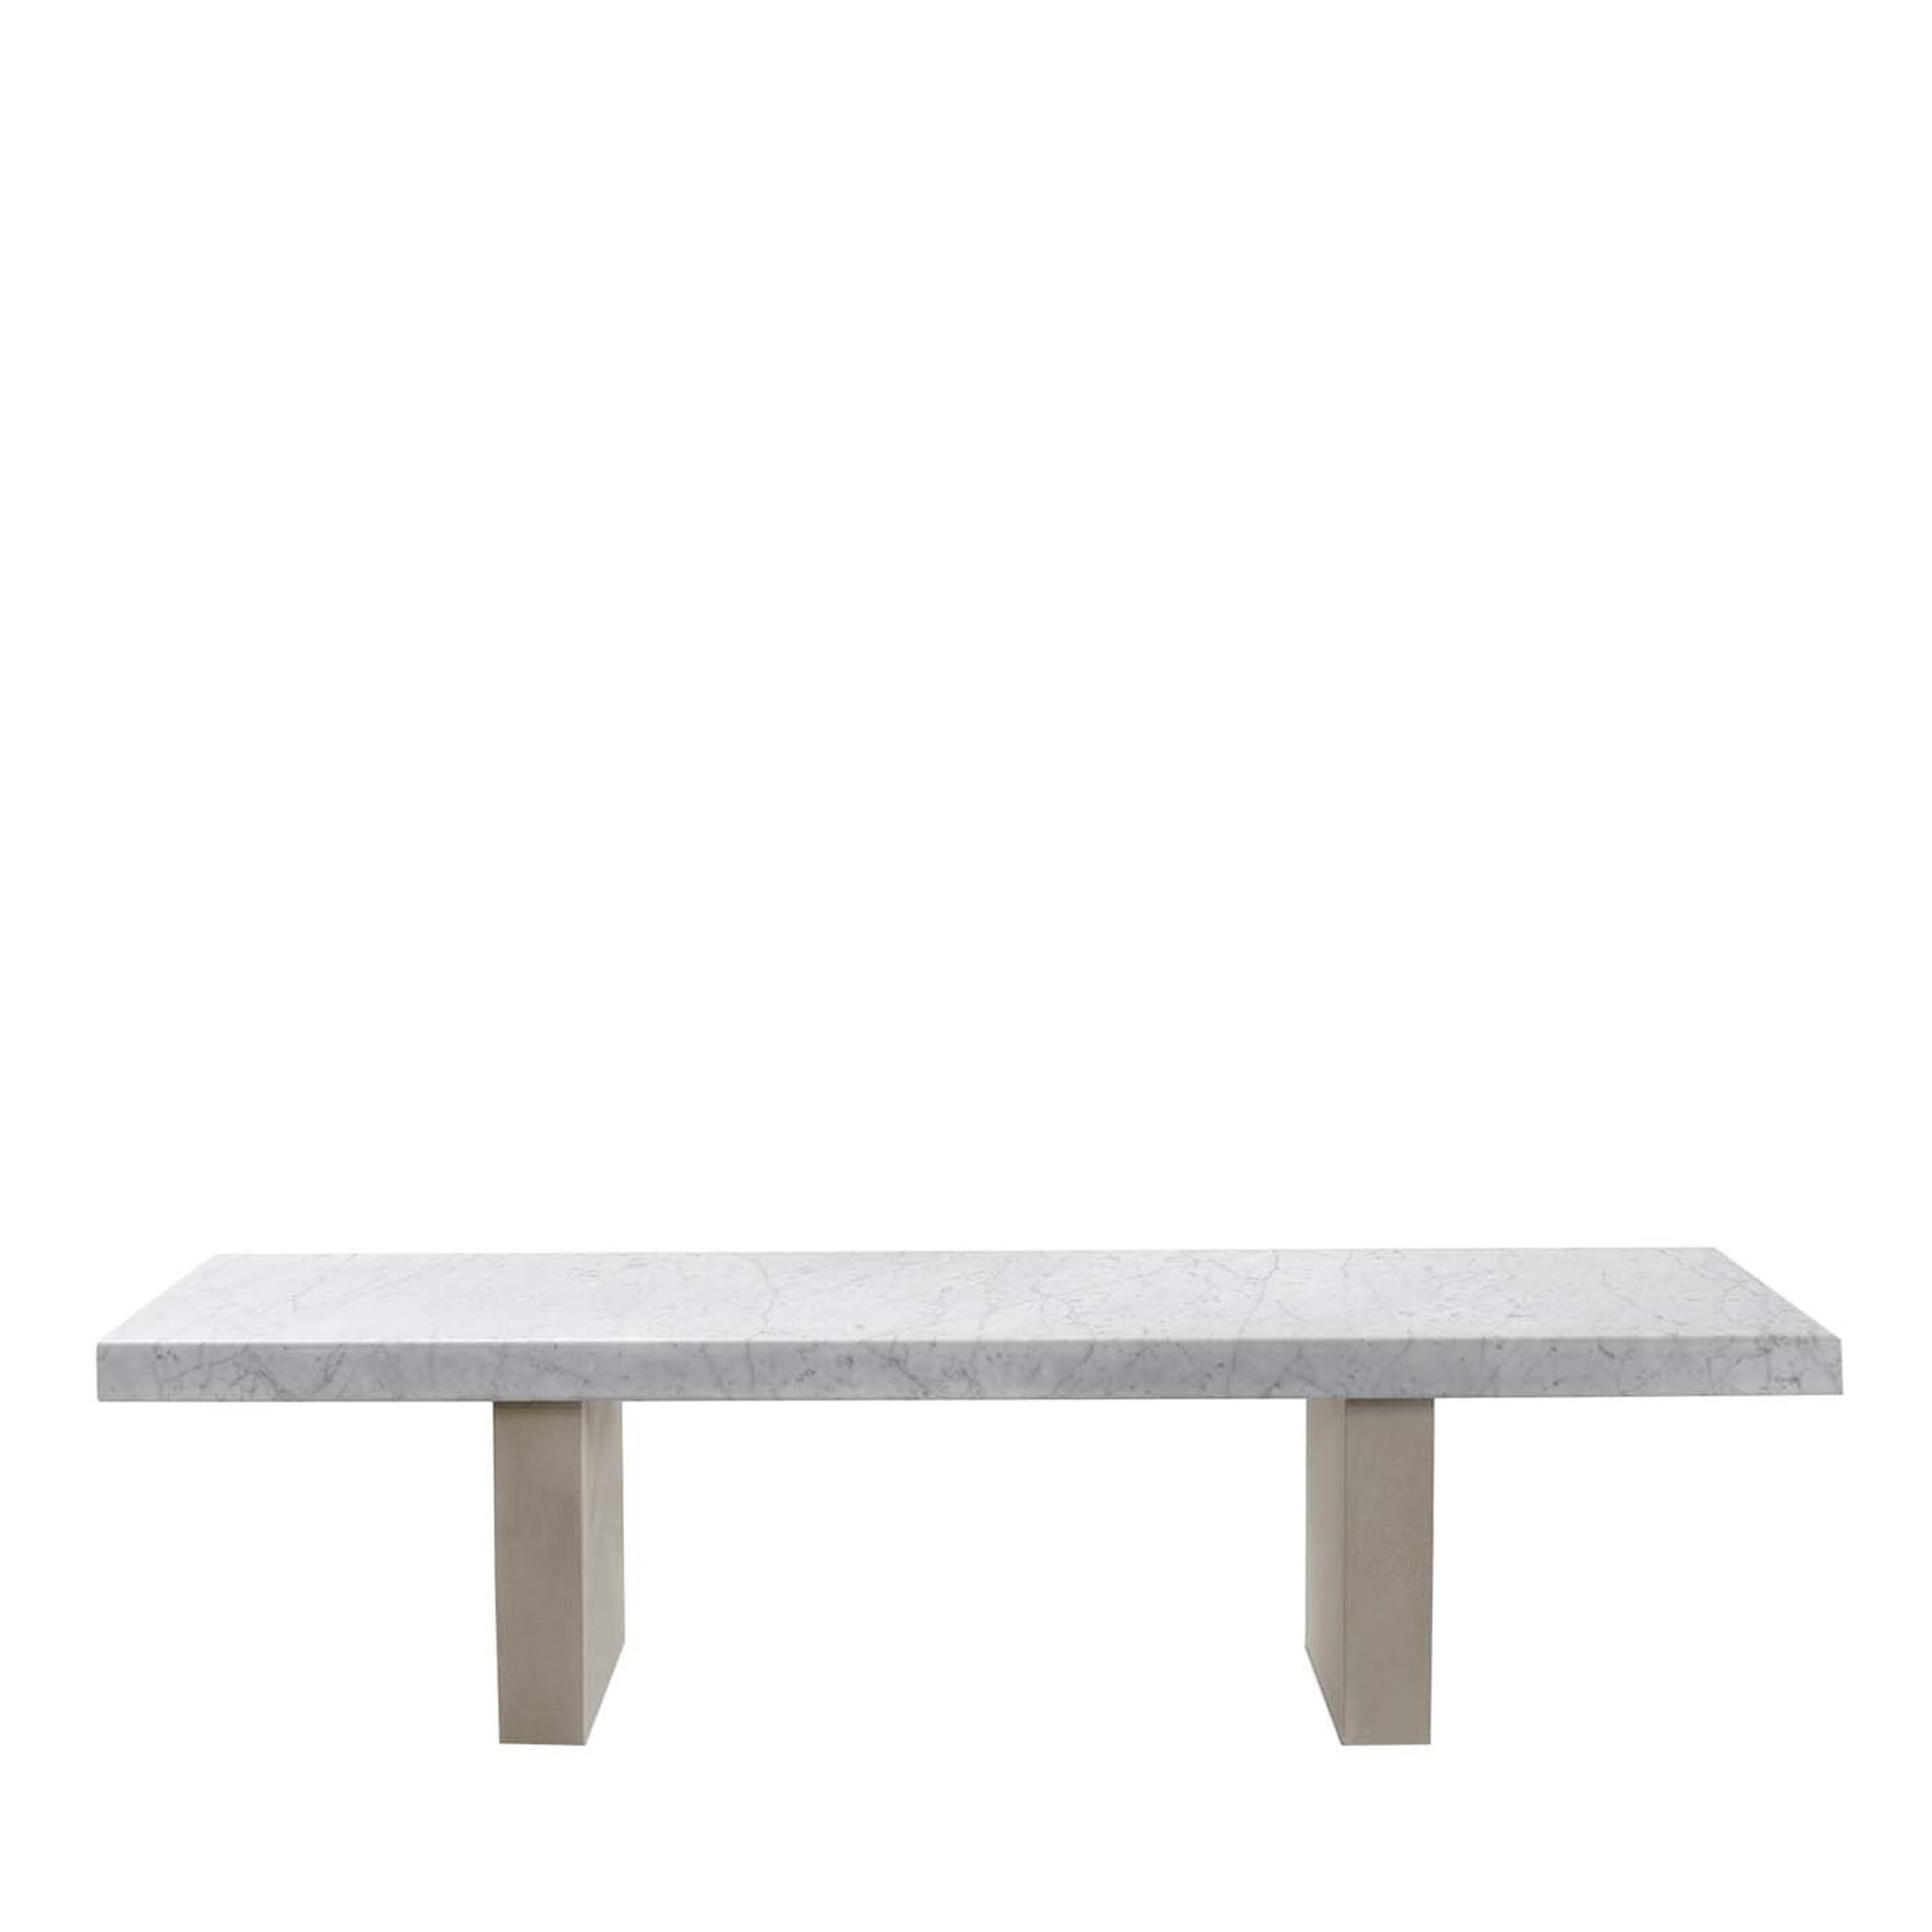 Span Outdoor Rectangular Dining Table by John Pawson - Main view